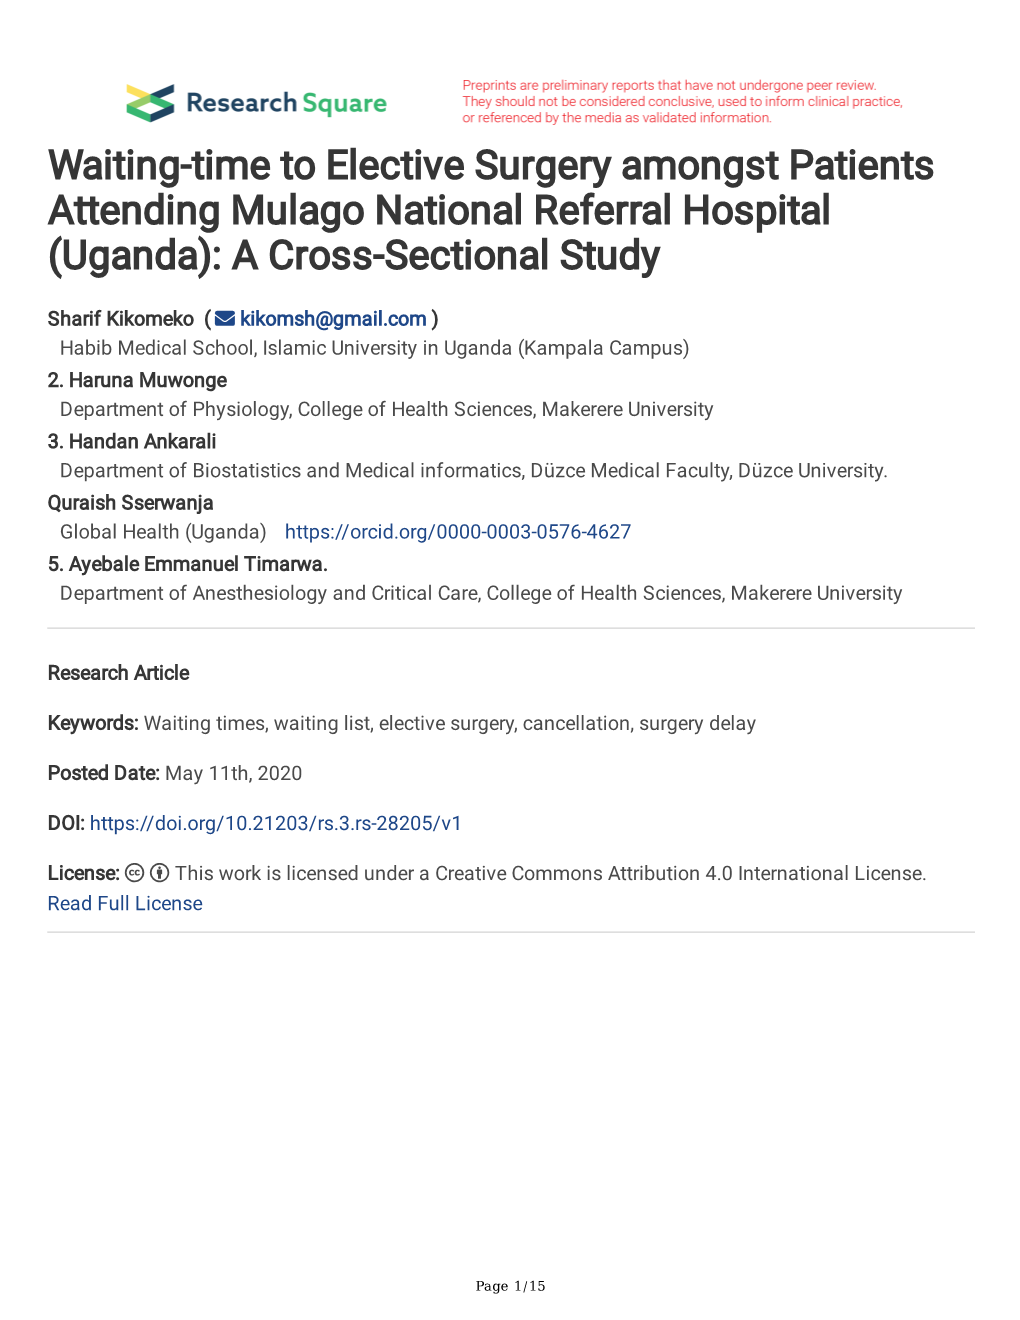 Waiting-Time to Elective Surgery Amongst Patients Attending Mulago National Referral Hospital (Uganda): a Cross-Sectional Study